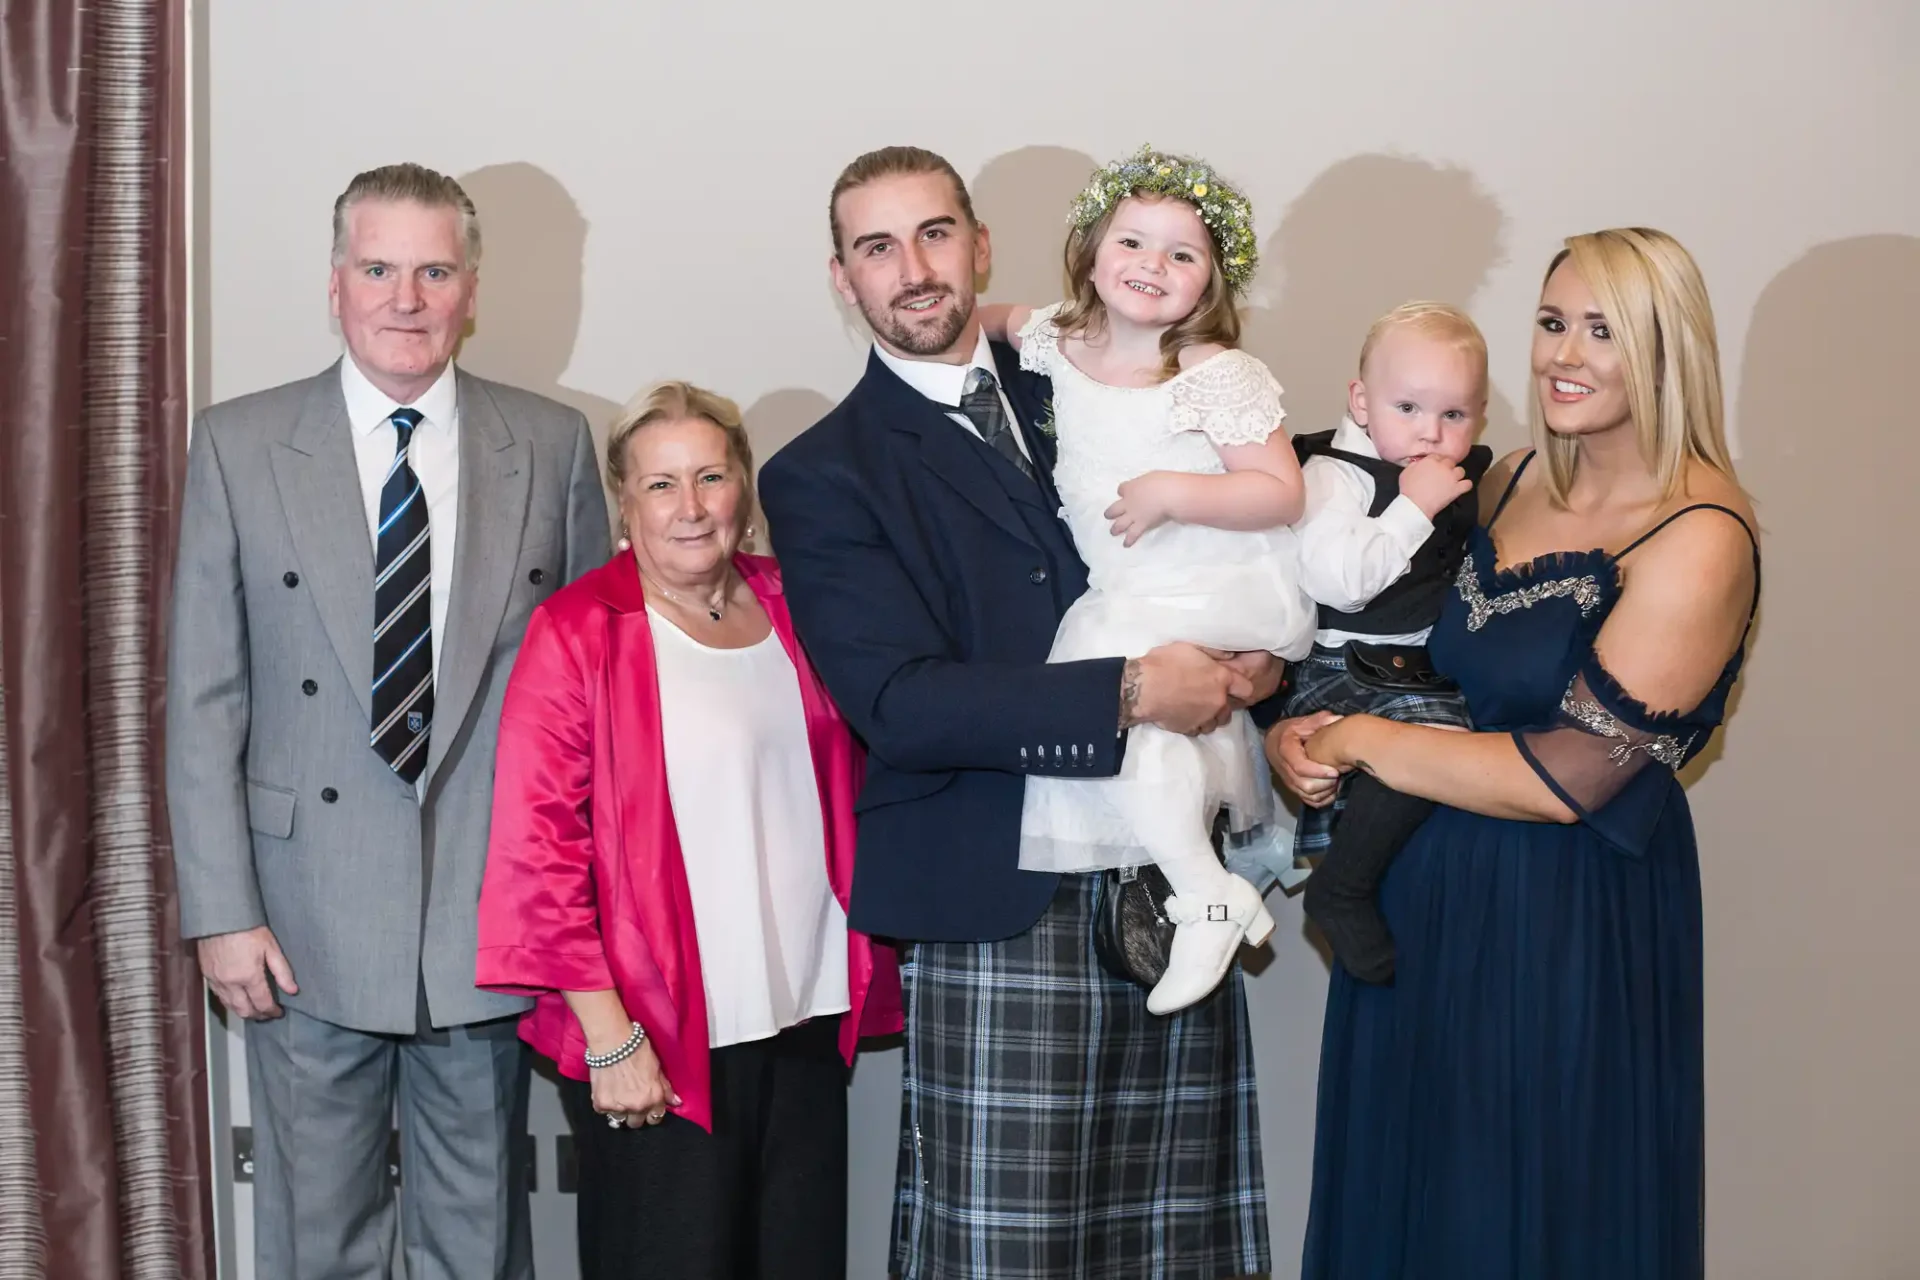 A family with three generations posing together: an elderly couple, a young man in a tartan kilt holding a toddler, a young woman, and a small girl in a floral crown.